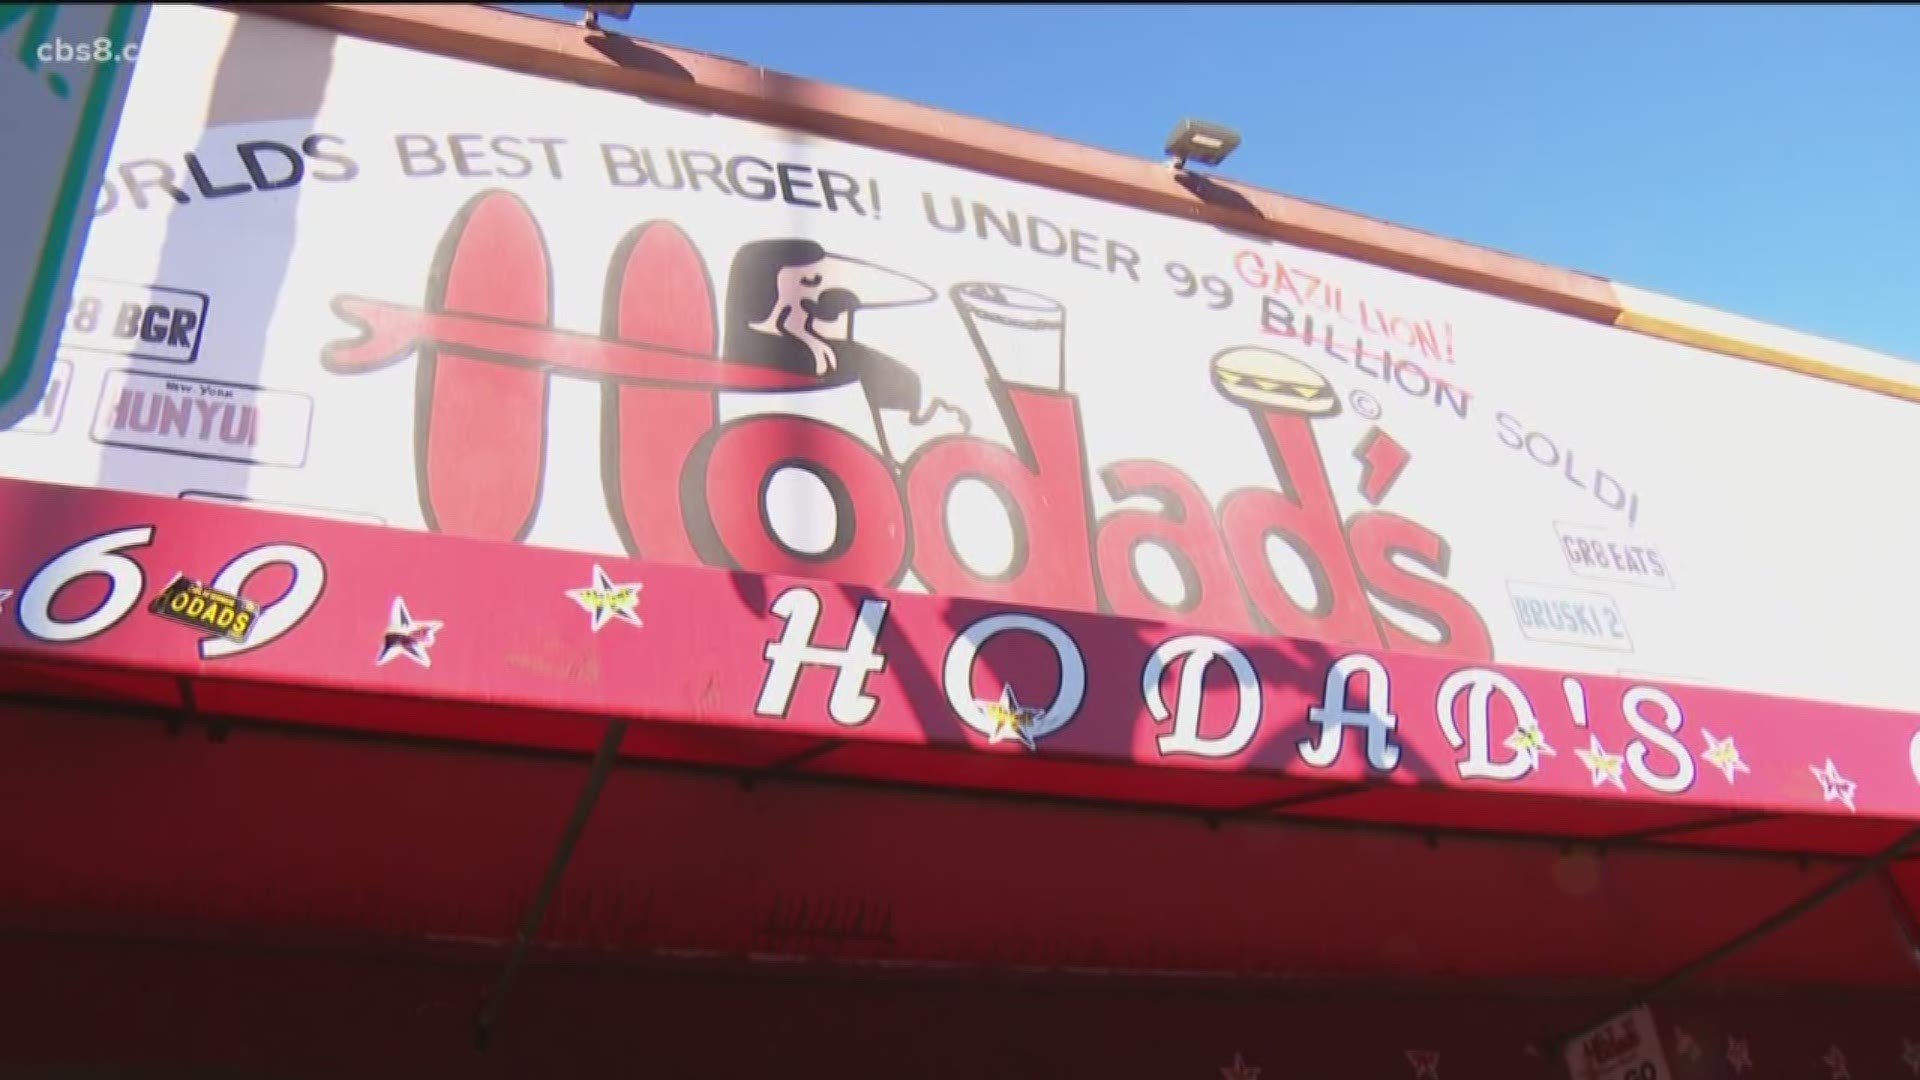 On Monday, fans of Hodad’s showed up to celebrate the iconic burger joints 50th anniversary and the late Mike Hardin's birthday.